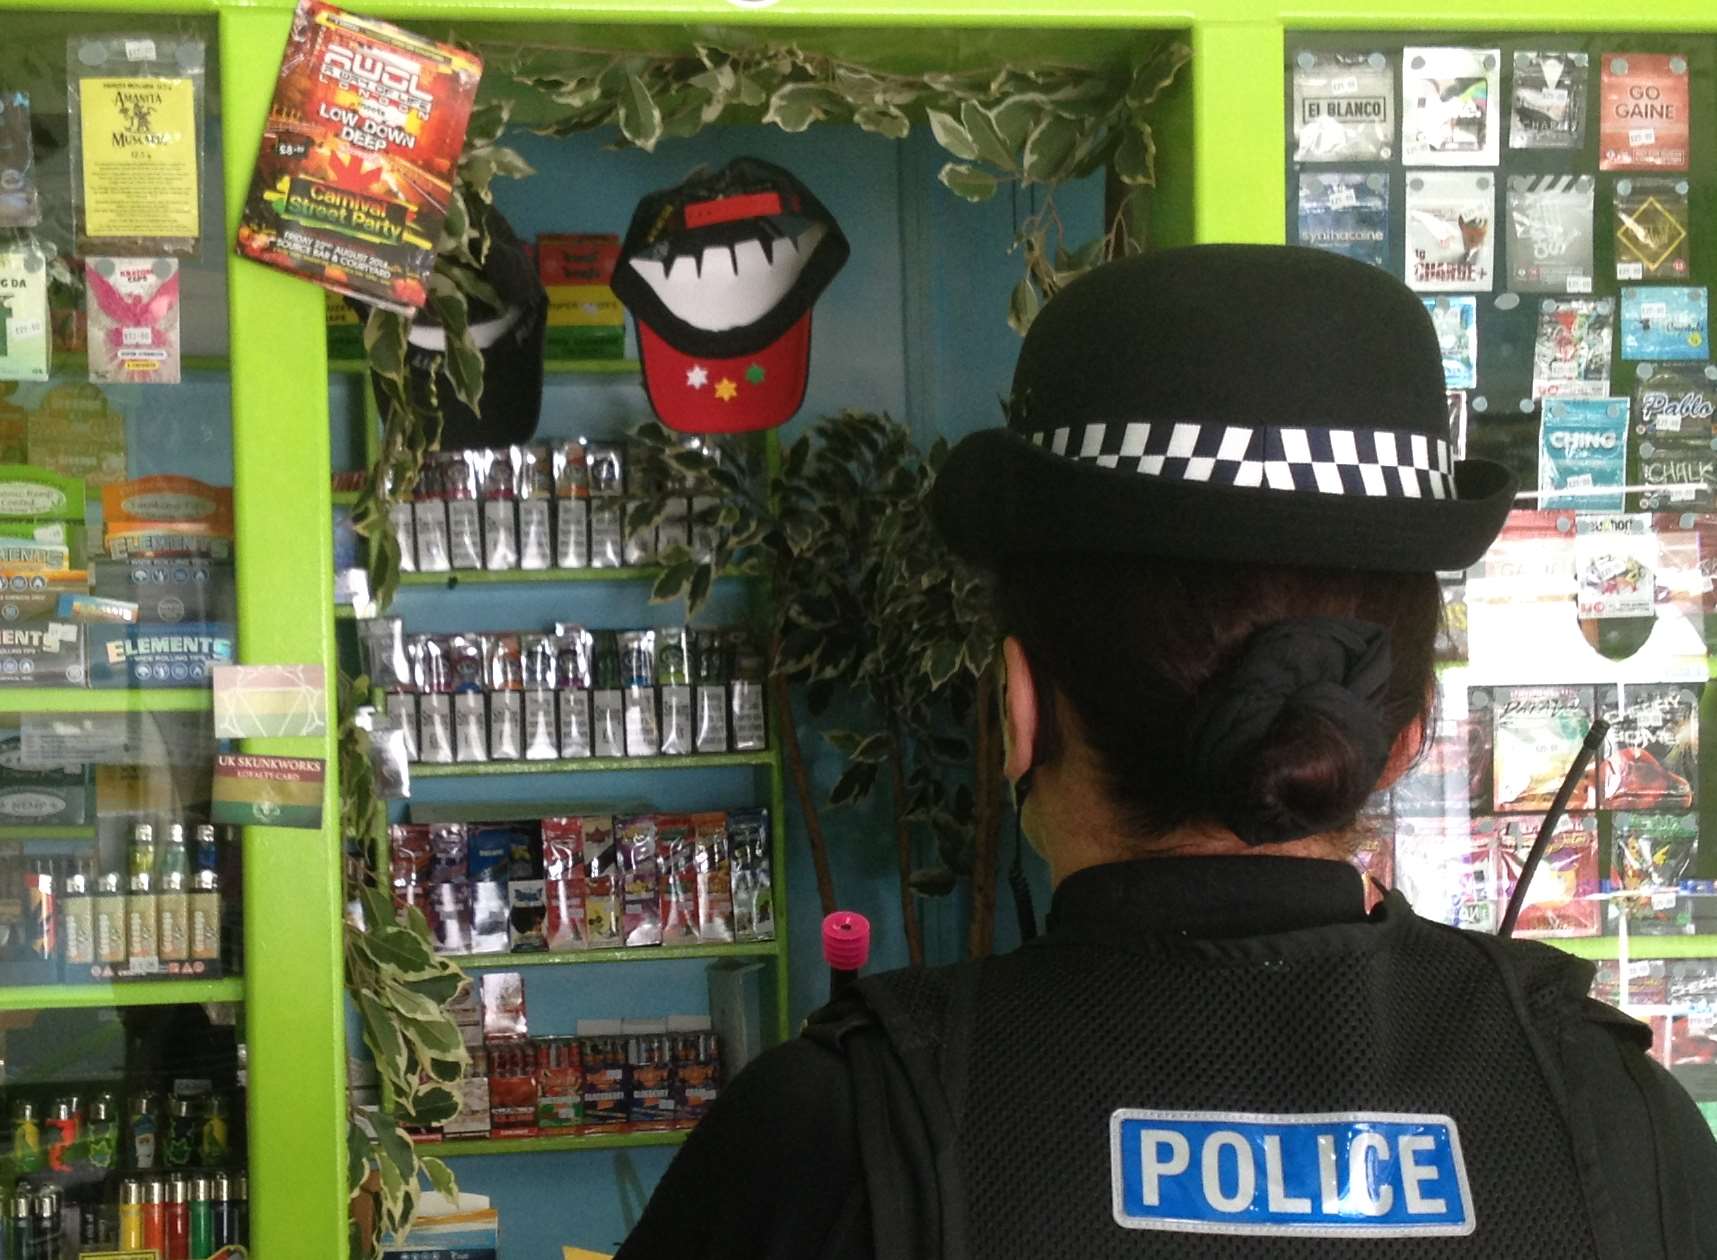 Police officers supported Trading Standards in the raid